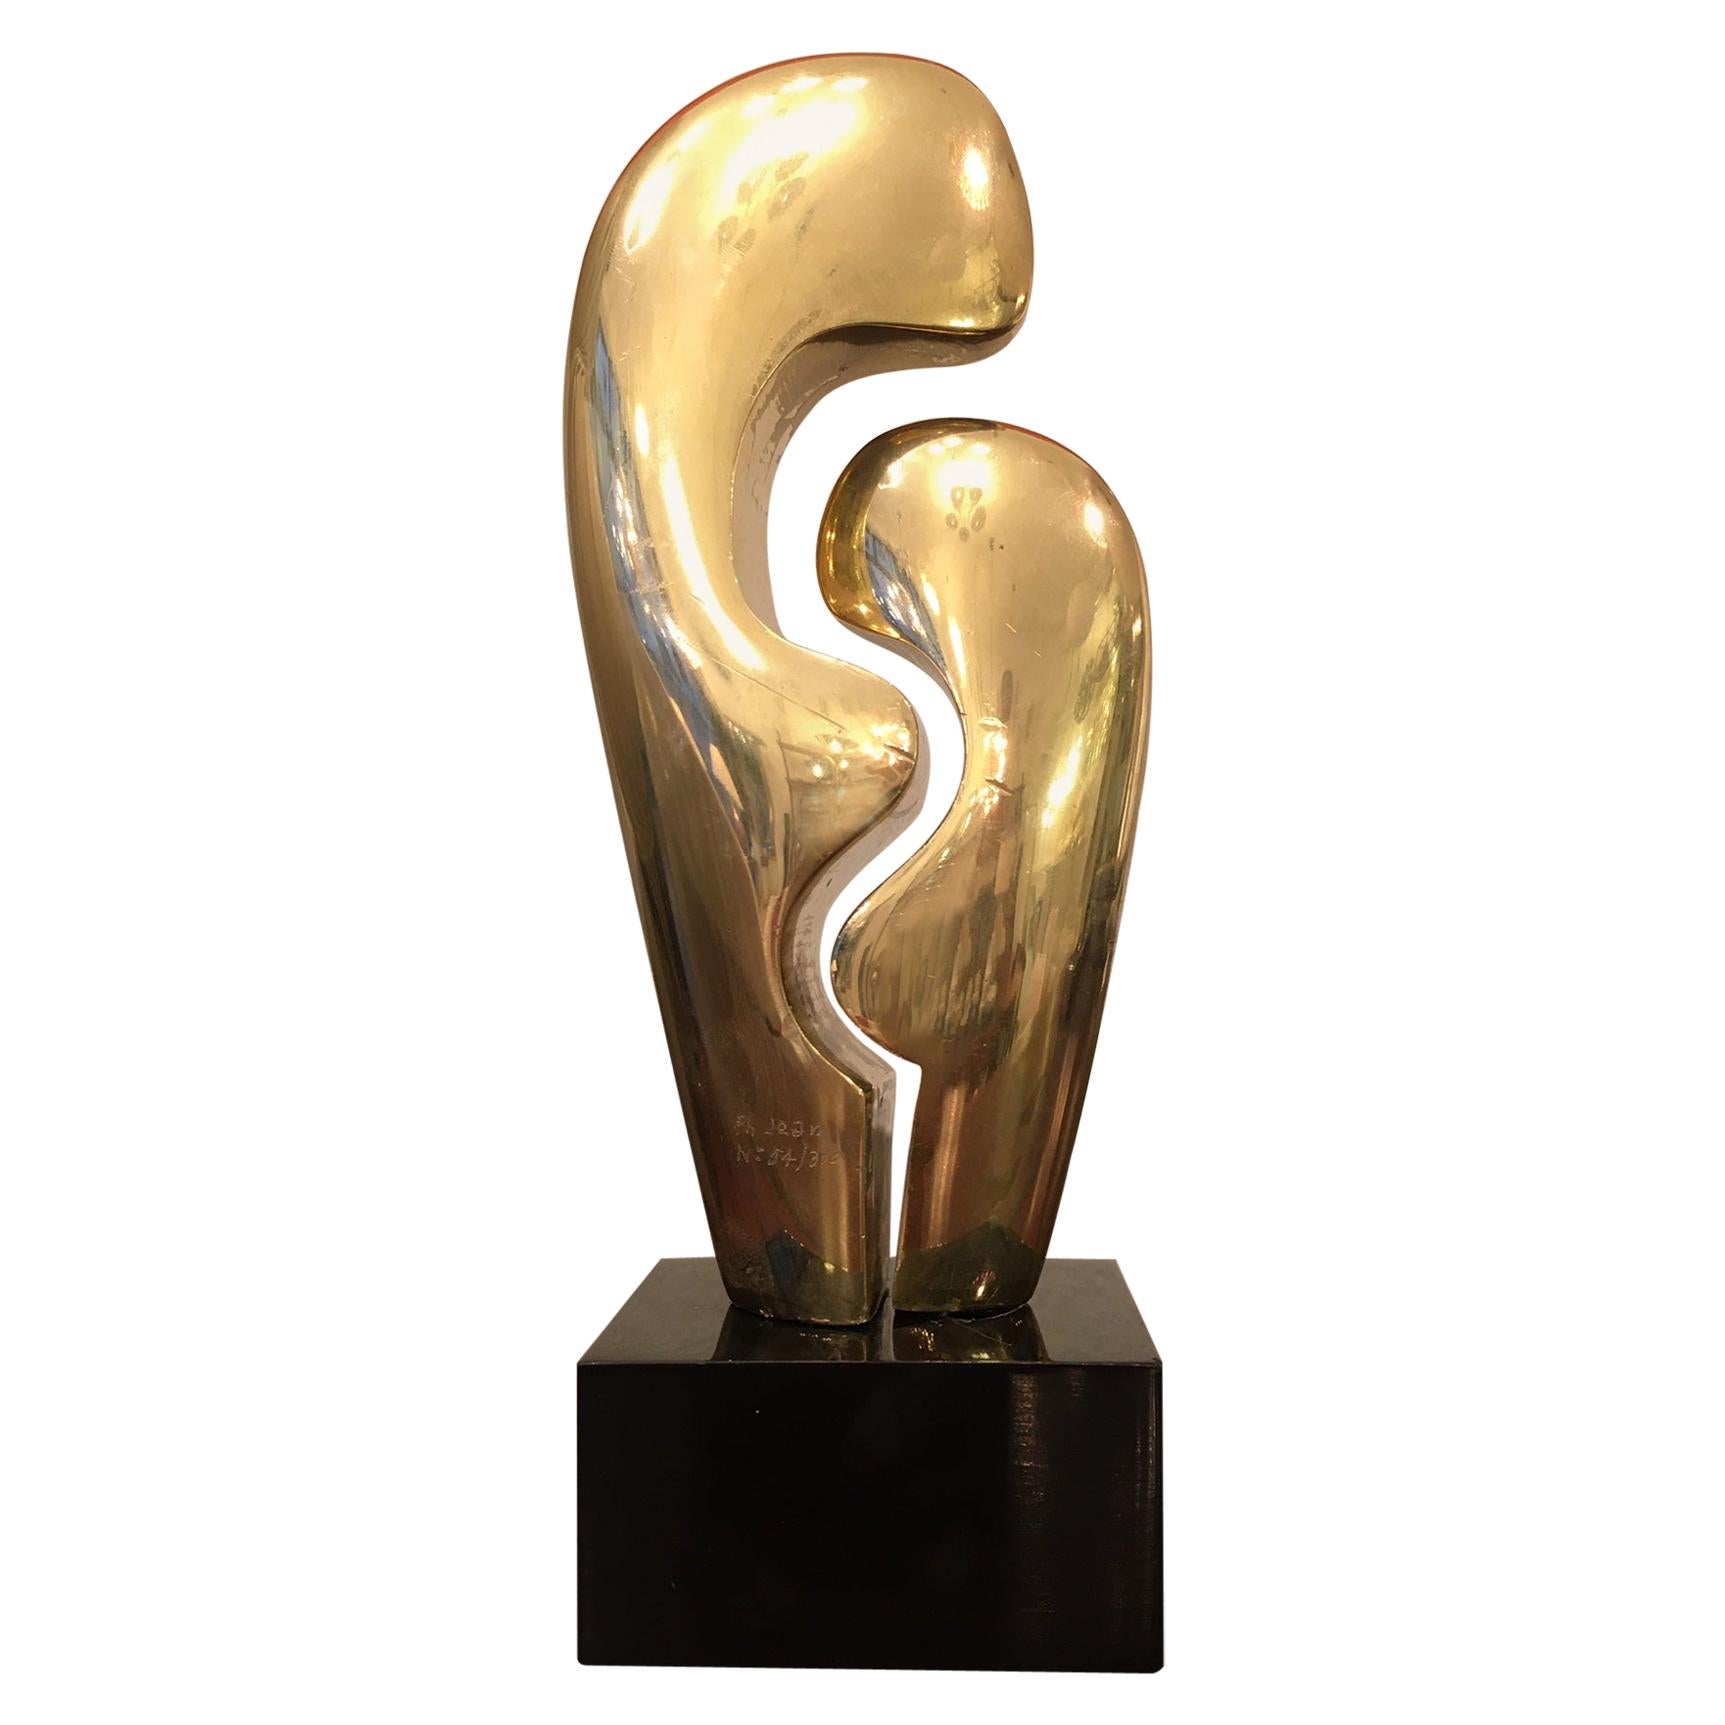 "Confidence" Signed and Numerated Gilded Bronze Sculpture by Philippe Jean 1970s